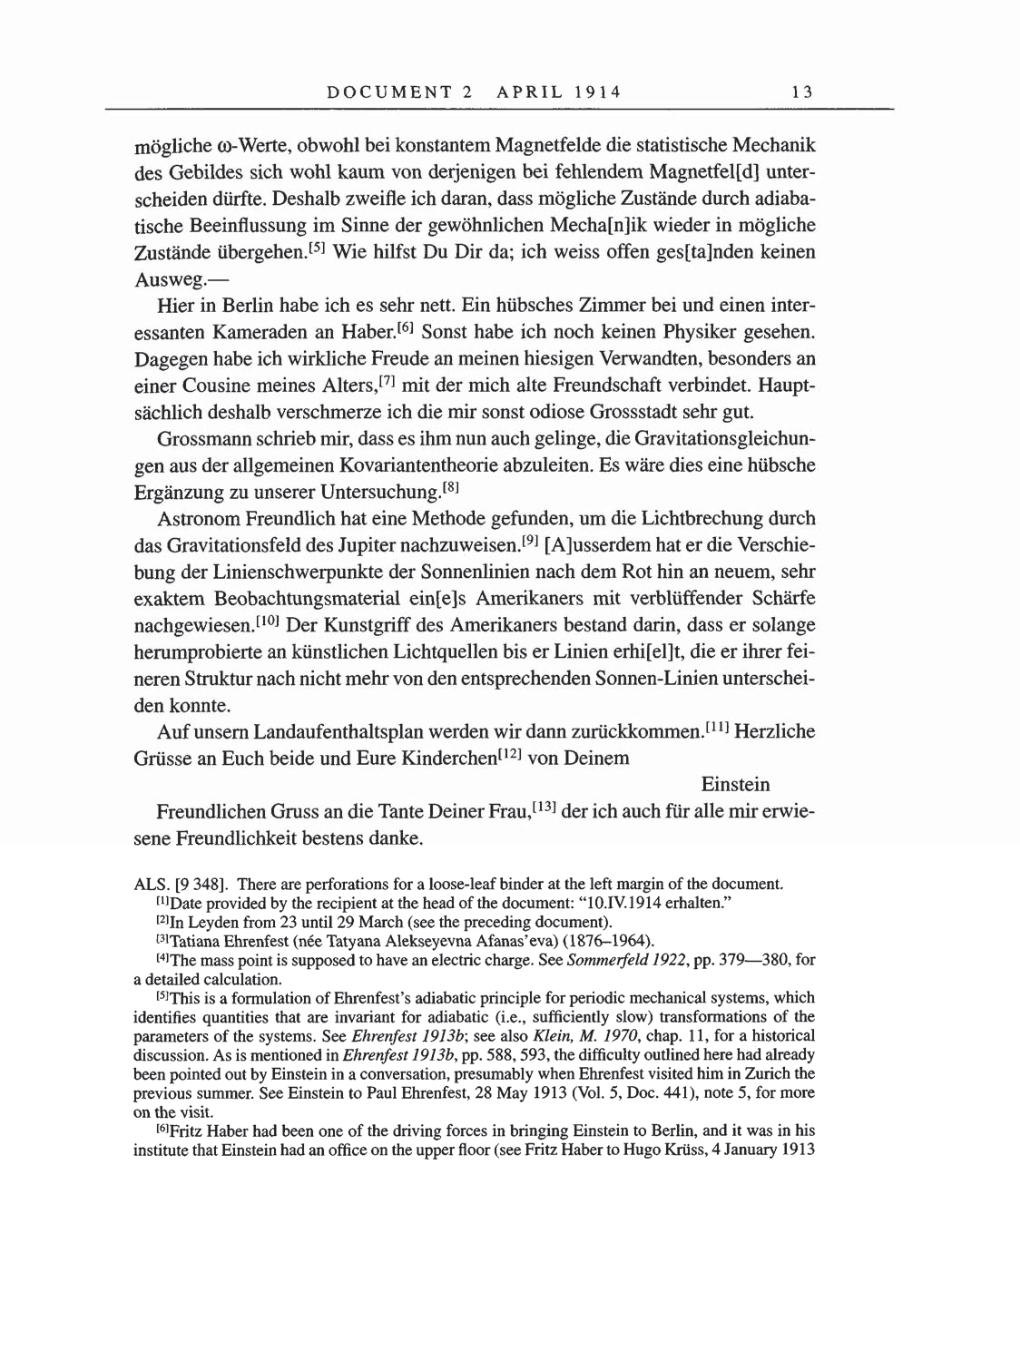 Volume 8, Part A: The Berlin Years: Correspondence 1914-1917 page 13